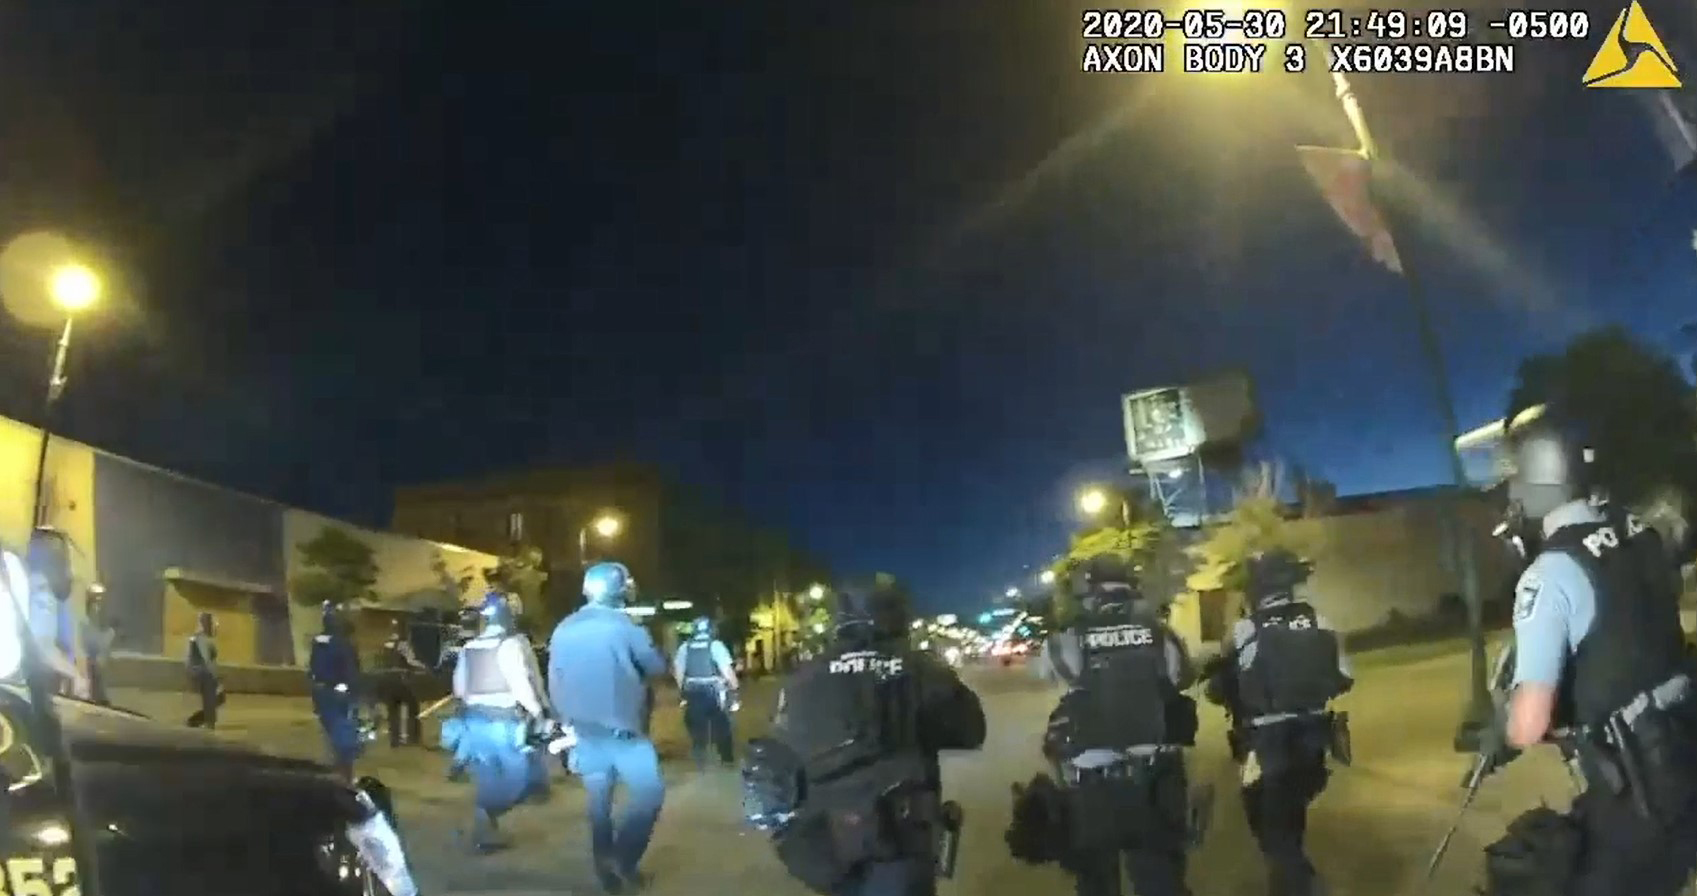 PHOTO: Newly released body camera footage shows Minneapolis police officers shooting protesters with rubber bullets.